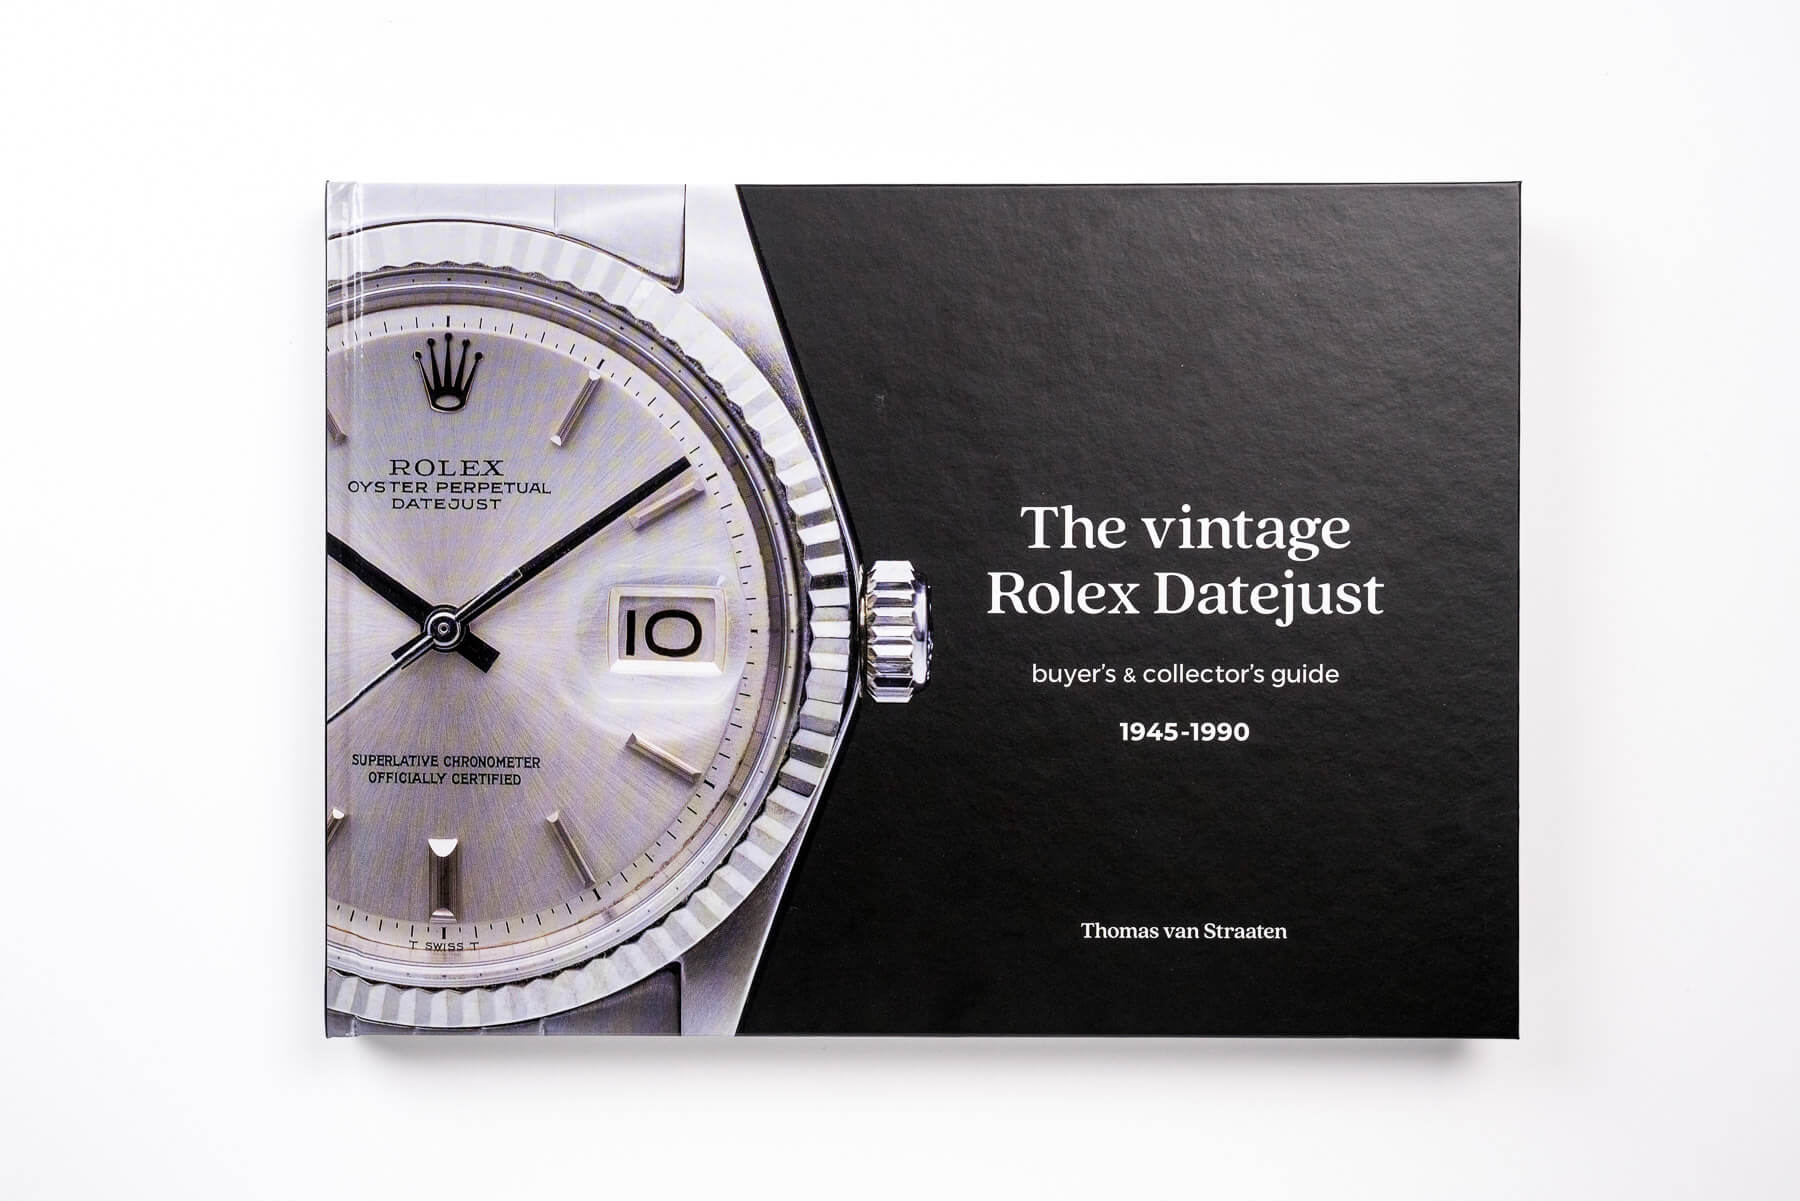 The Datejust Buyer's & Collector's Guide 1945-1990 – Fratello